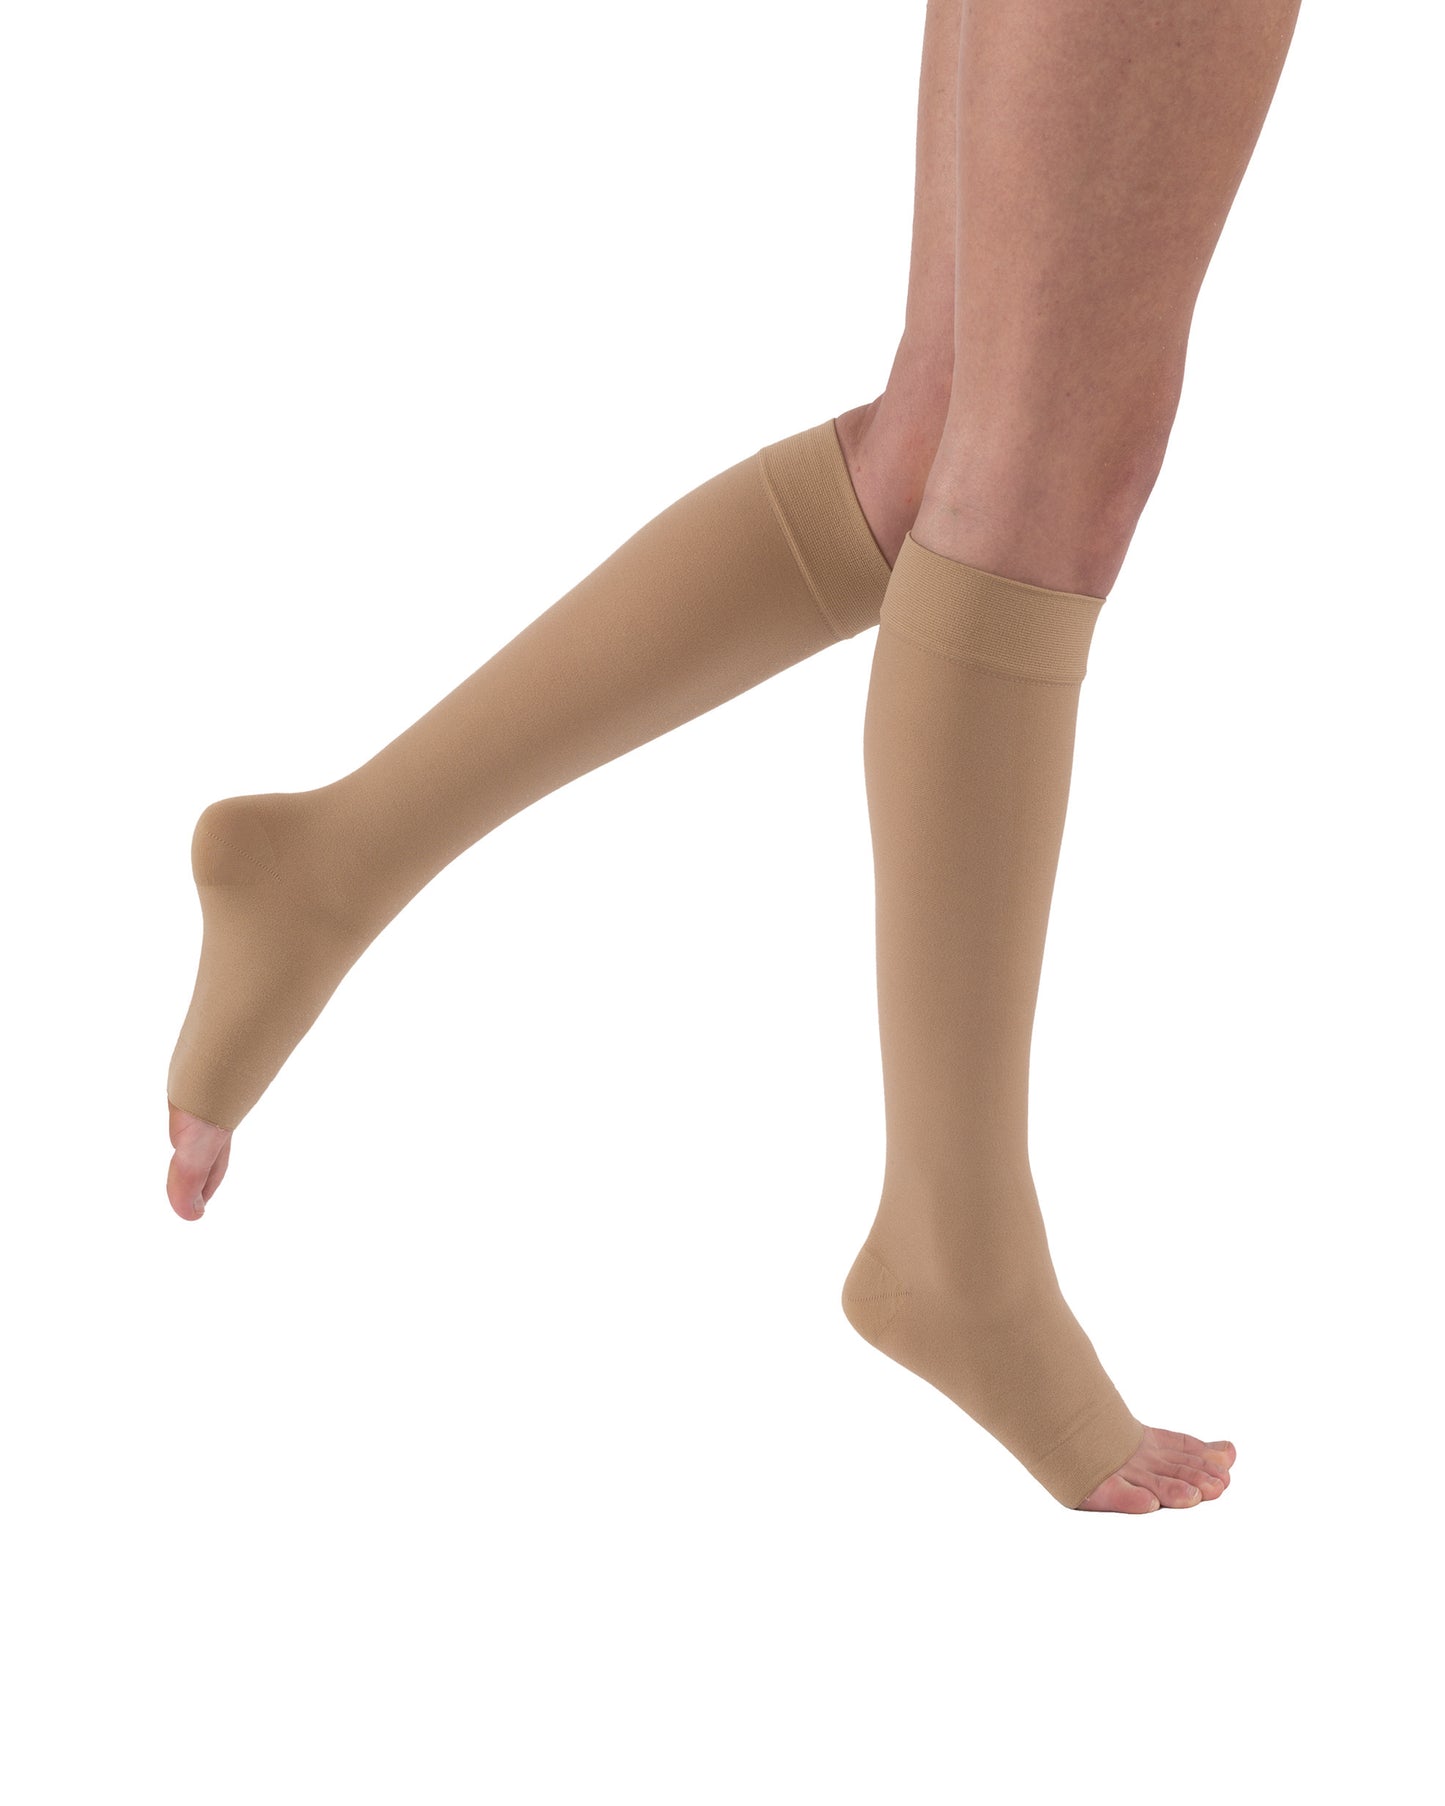 JOBST Relief Compression Stockings 15-20 mmHg Knee High Open Toe